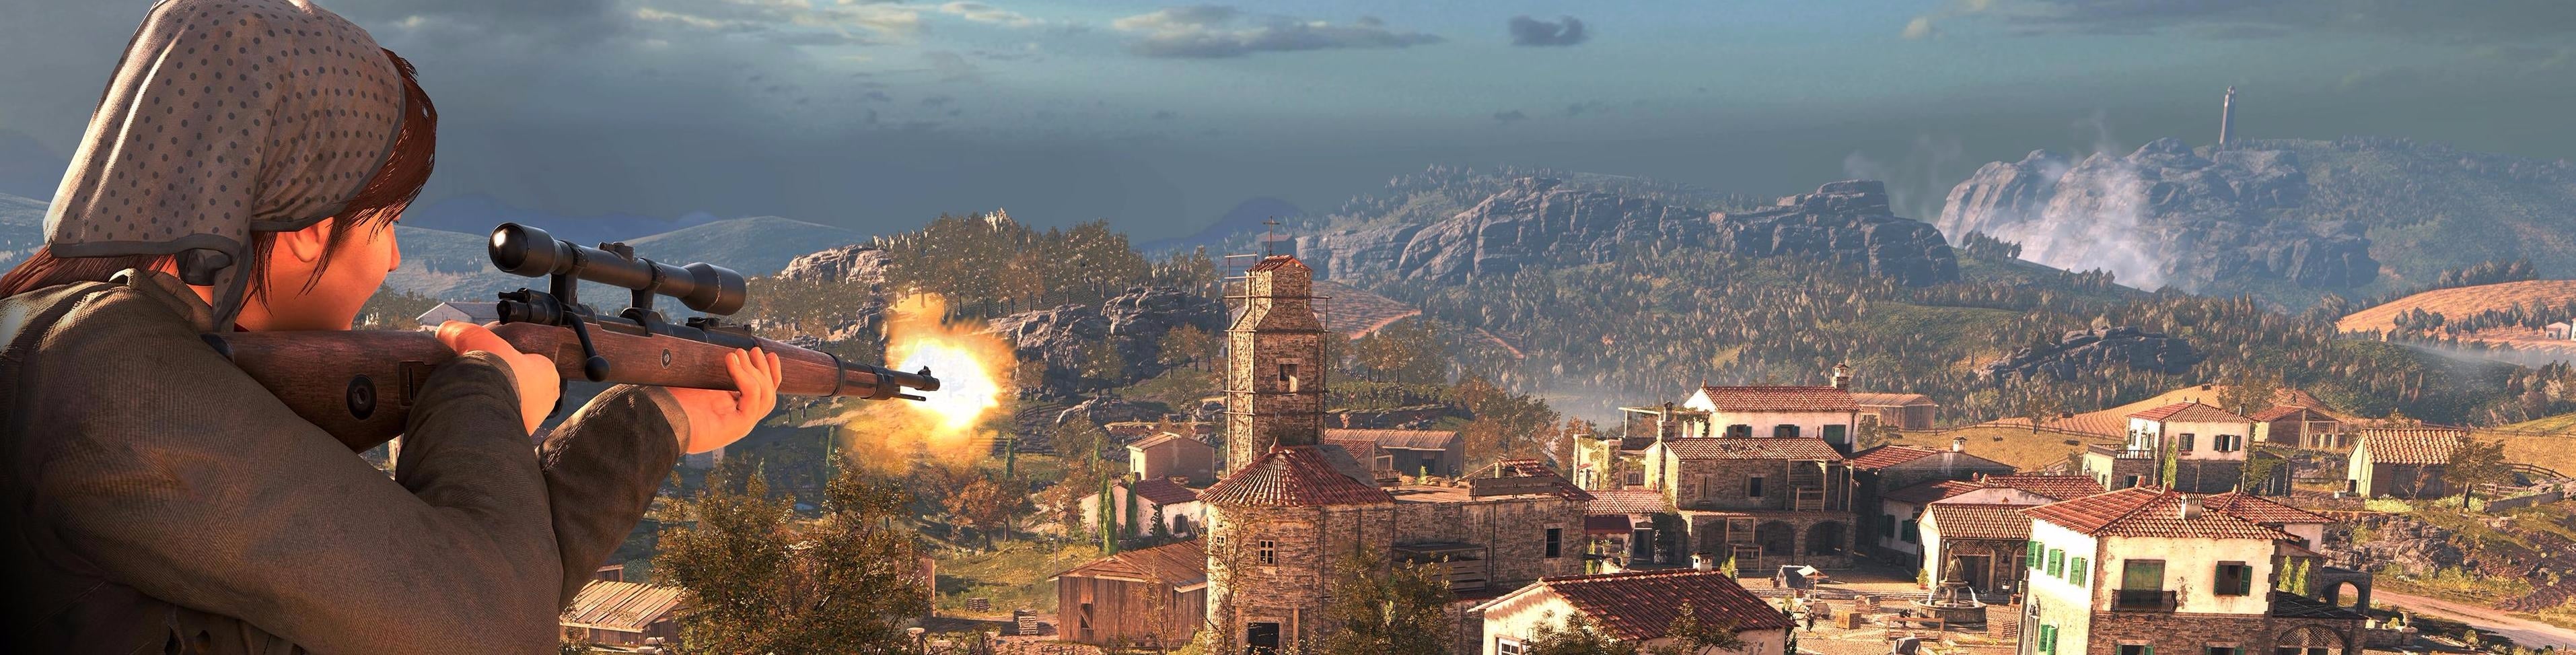 Image for 30 minutes of gameplay from Sniper Elite 4's opening level, San Celini